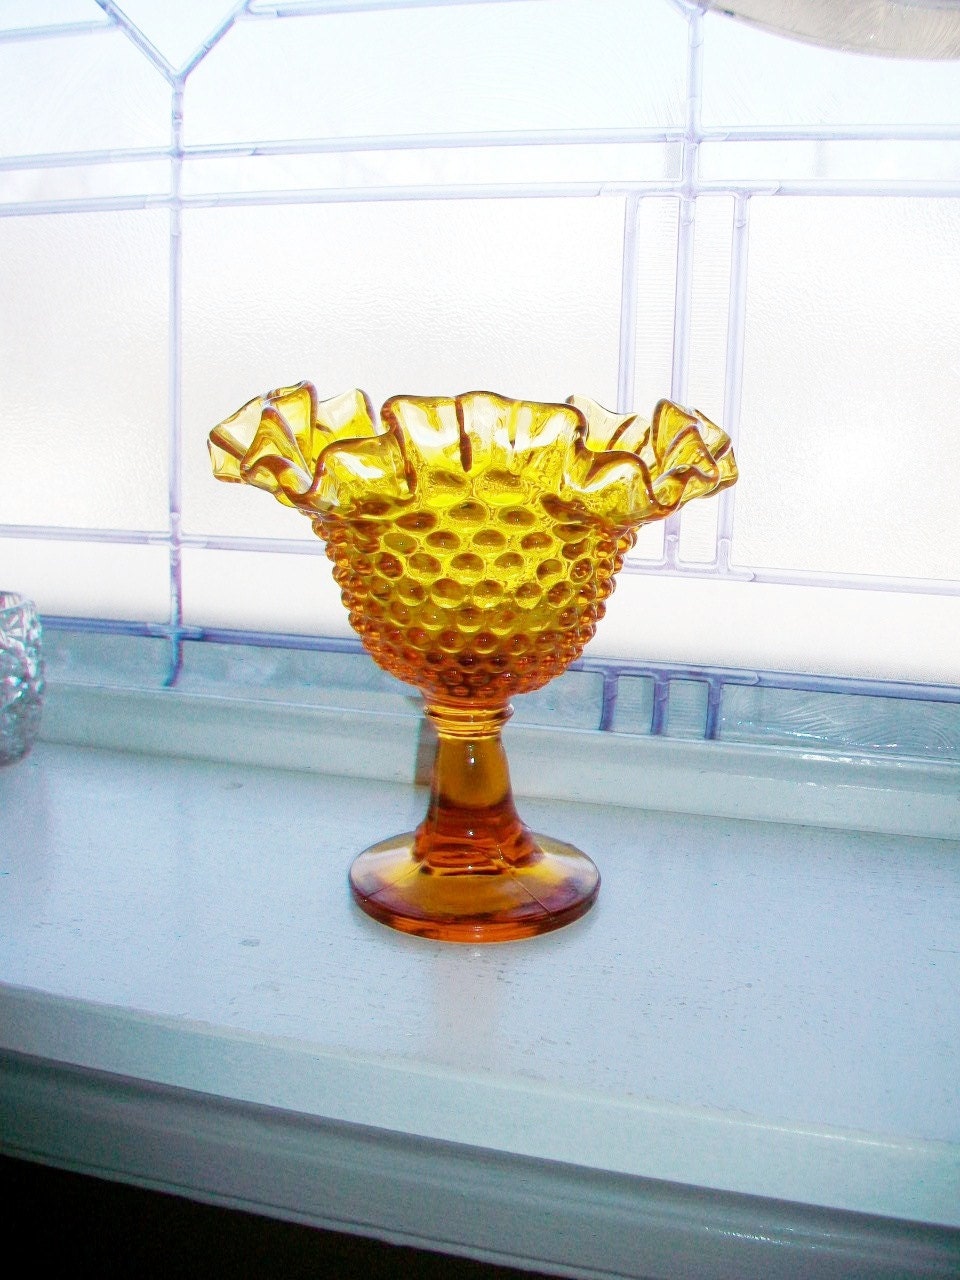 Vintage Fenton Amber Glass Hobnail Pedestal Dish Compote With Ruffled Edge 1960s